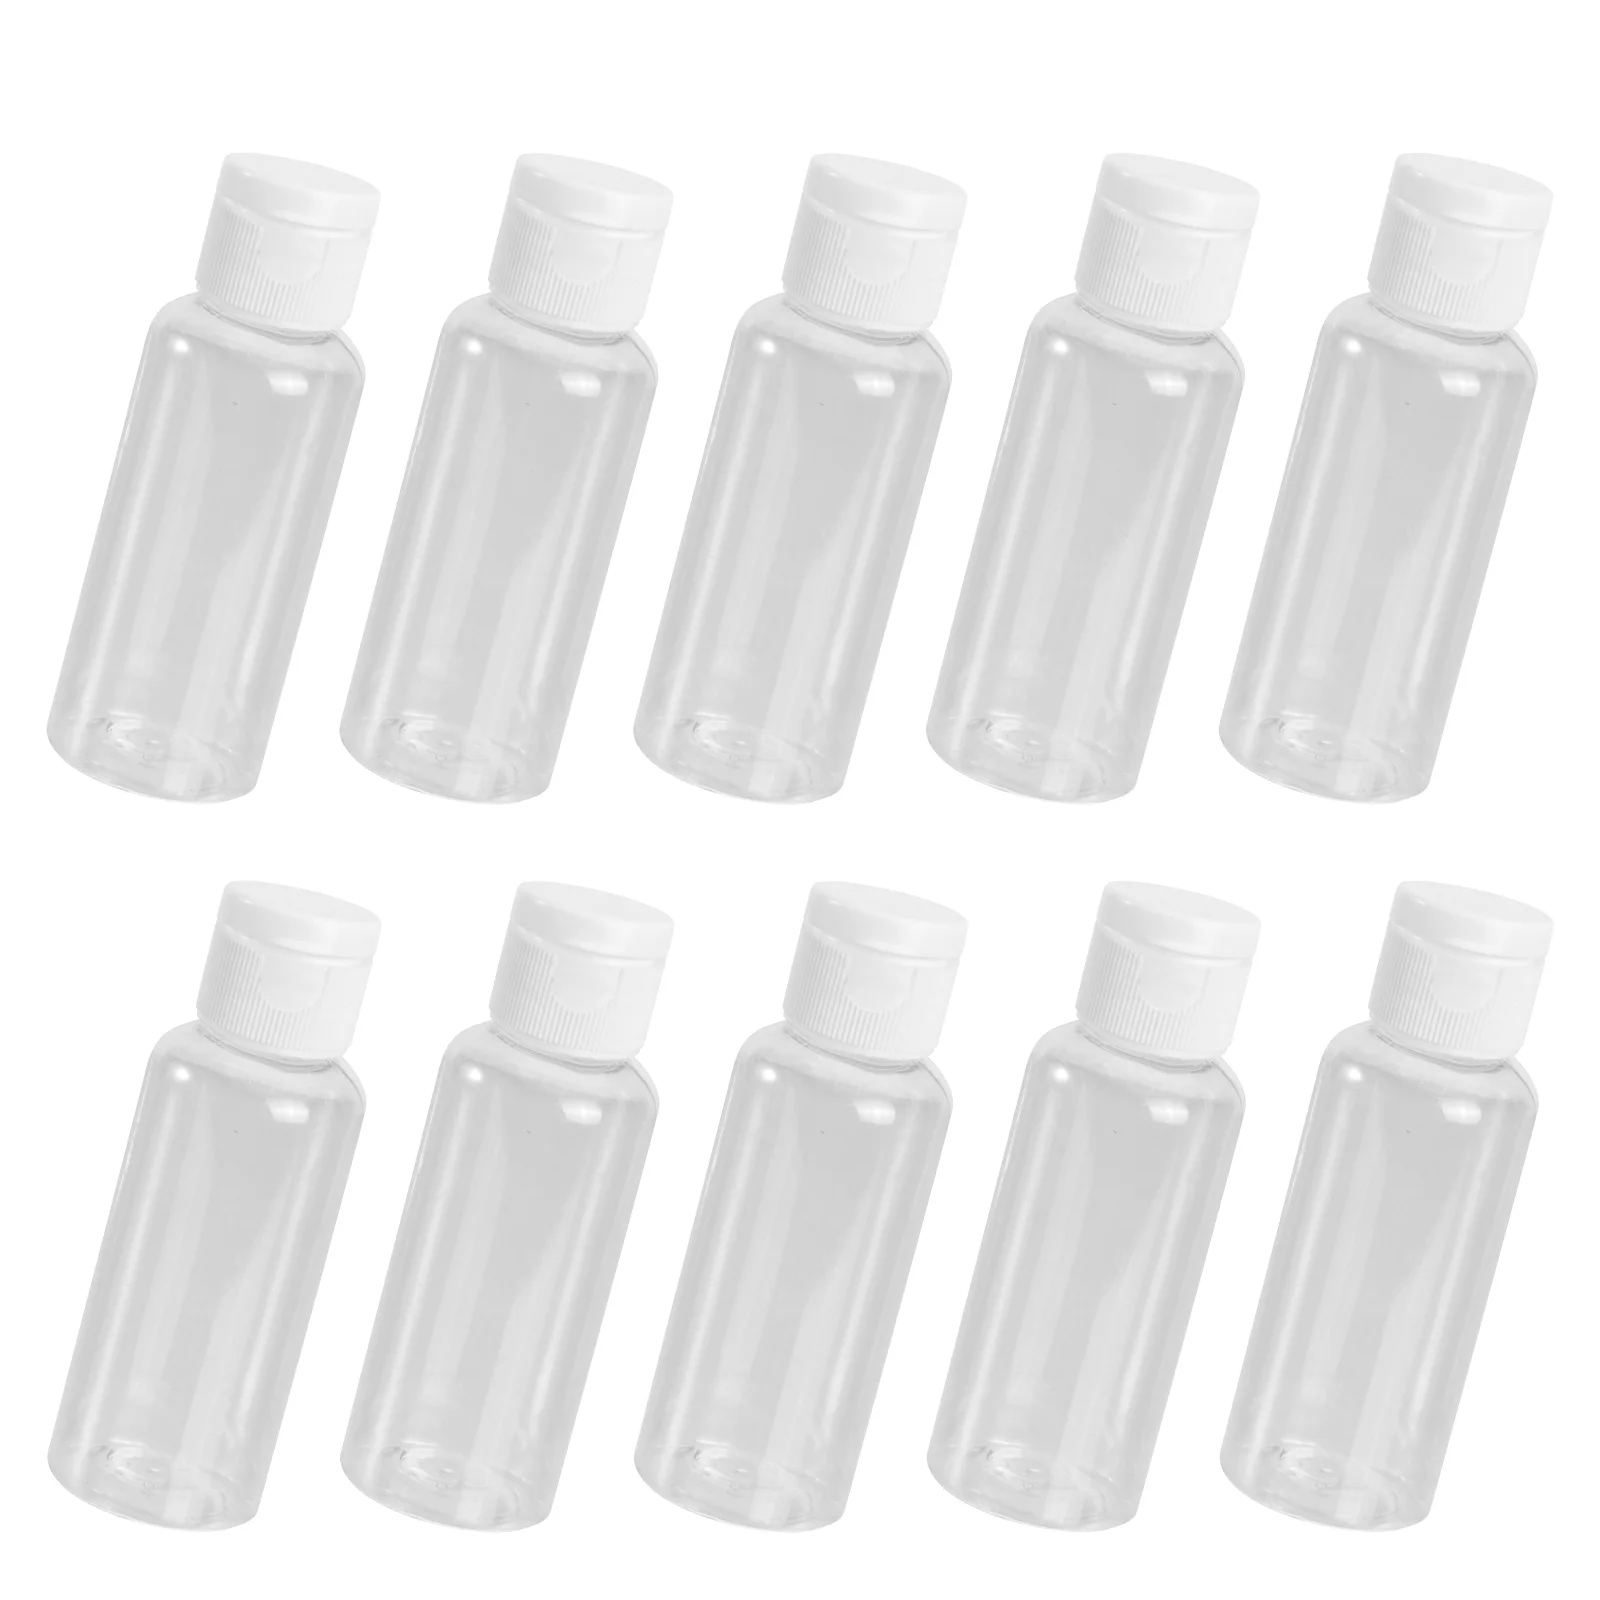 Travel Empty Sample Bottle Container with Cap Travel Vial Pot for Emollient Water Sample Shower Makeup Lotion Emulsion